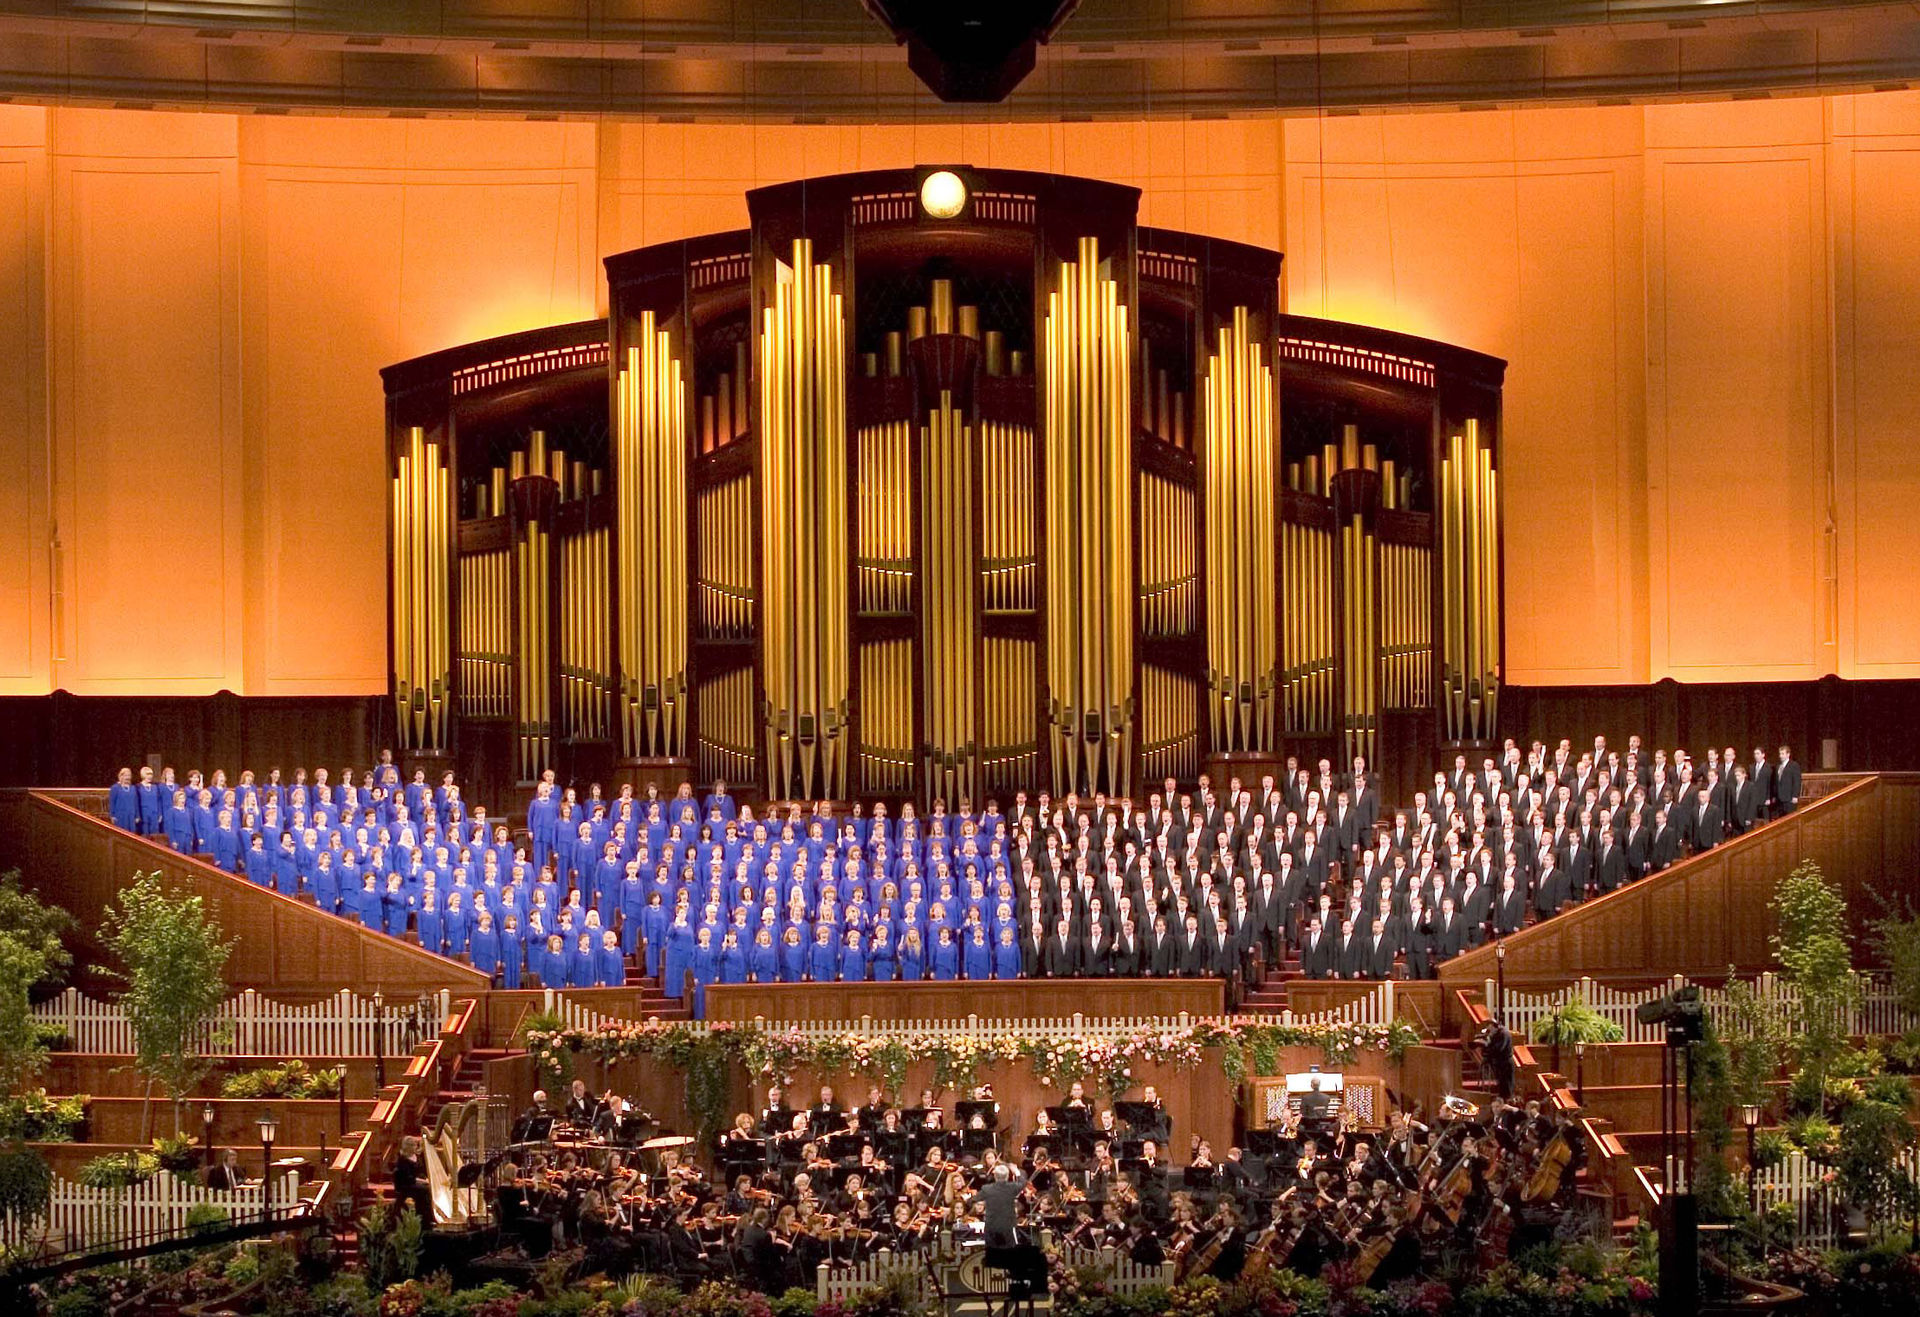 "Mormon Tabernacle Choir to Sing at US Presidential Inauguration"